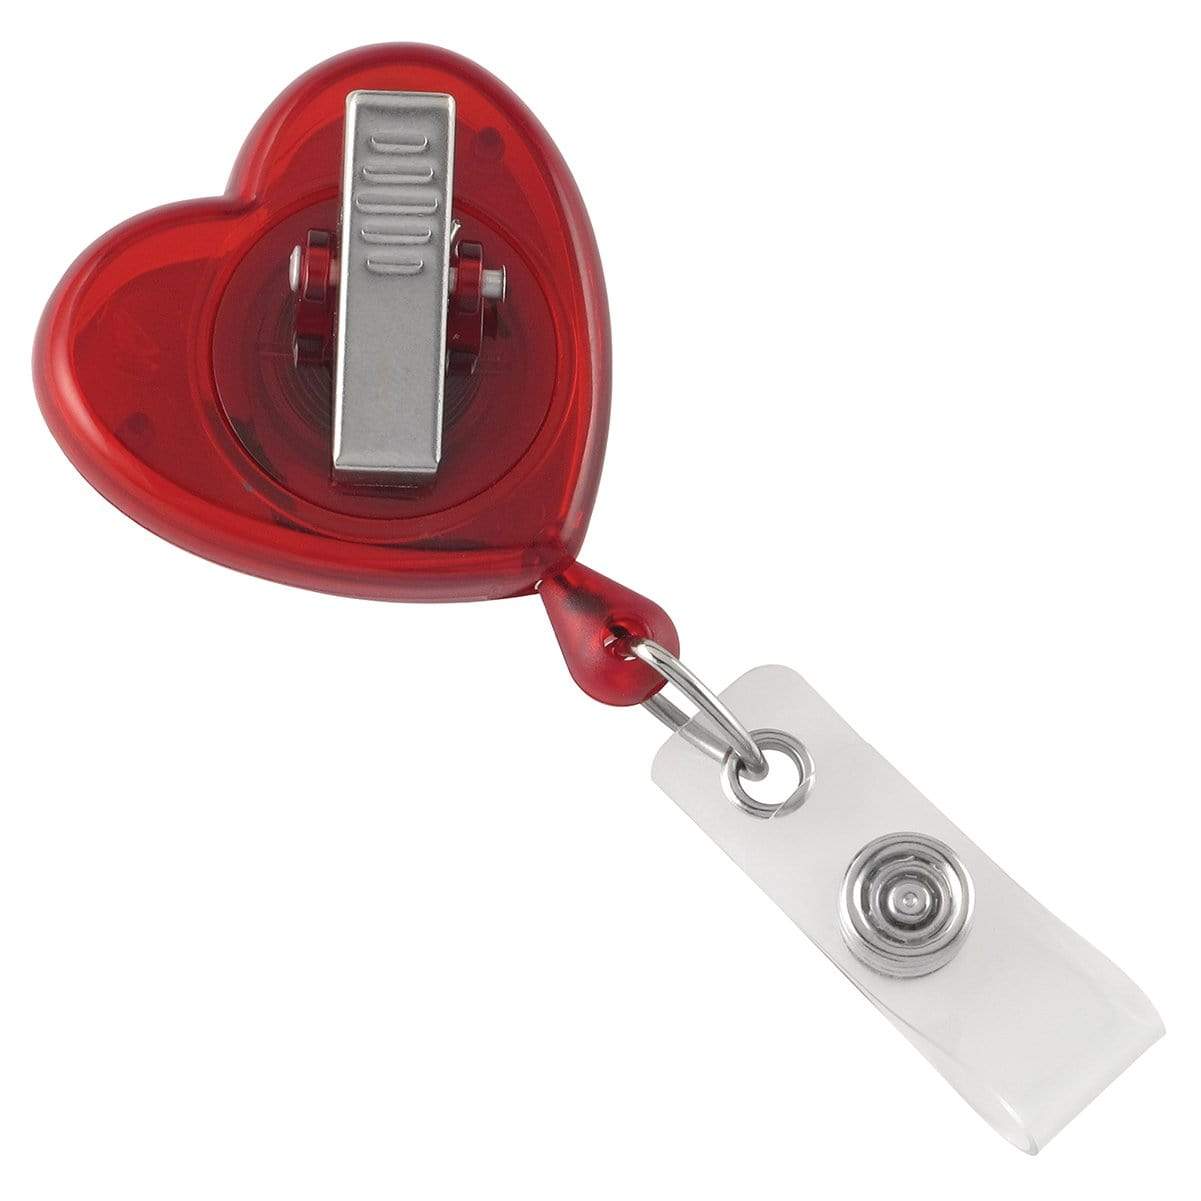 Heart Shaped EKG Themed Badge Reel with Swivel Spring Clip (2120-76XX) -  Translucent Red